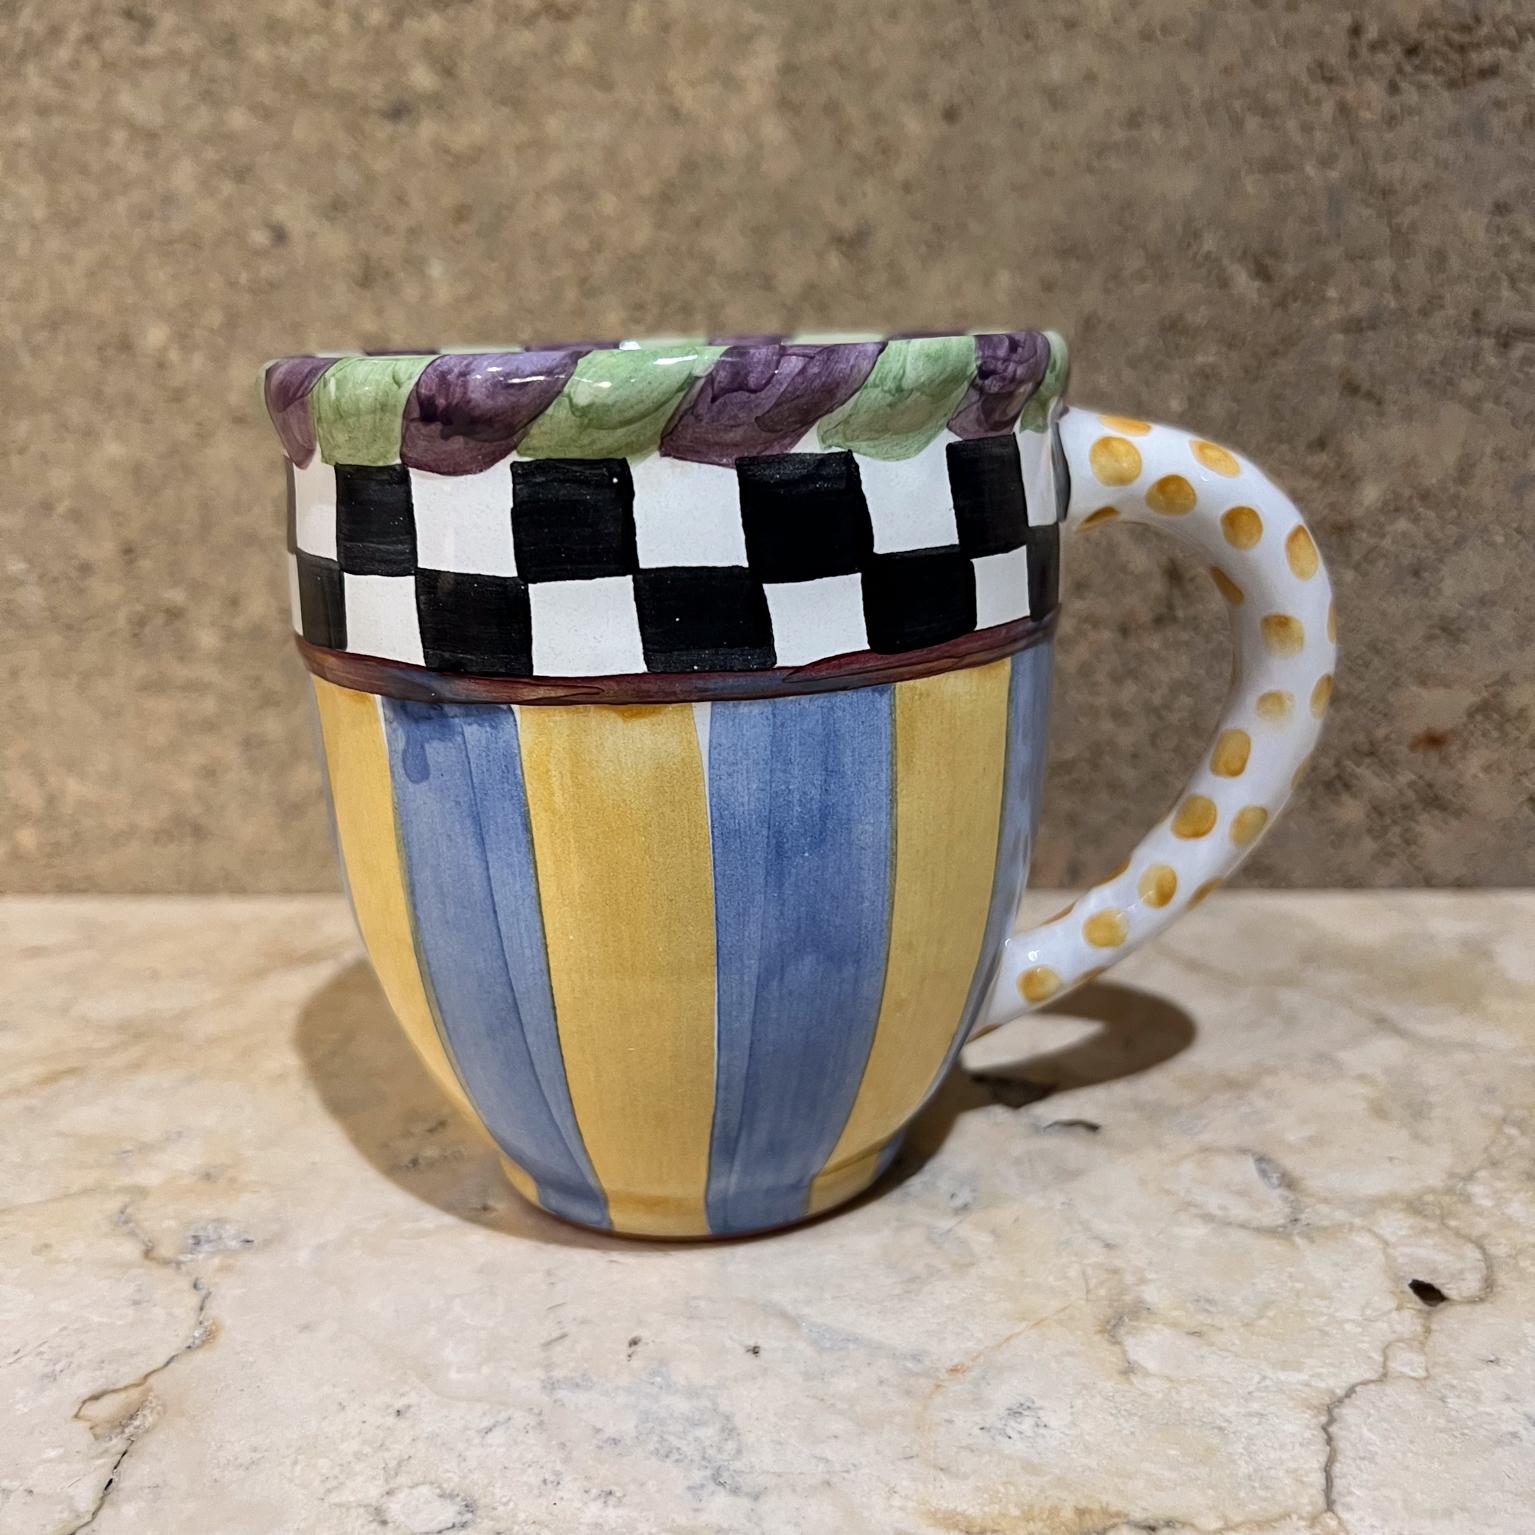 1980s MacKenzie-Childs Piccadilly Mug
4.5 h x 5.5 d x 4 diameter
Preowned vintage
Refer to images